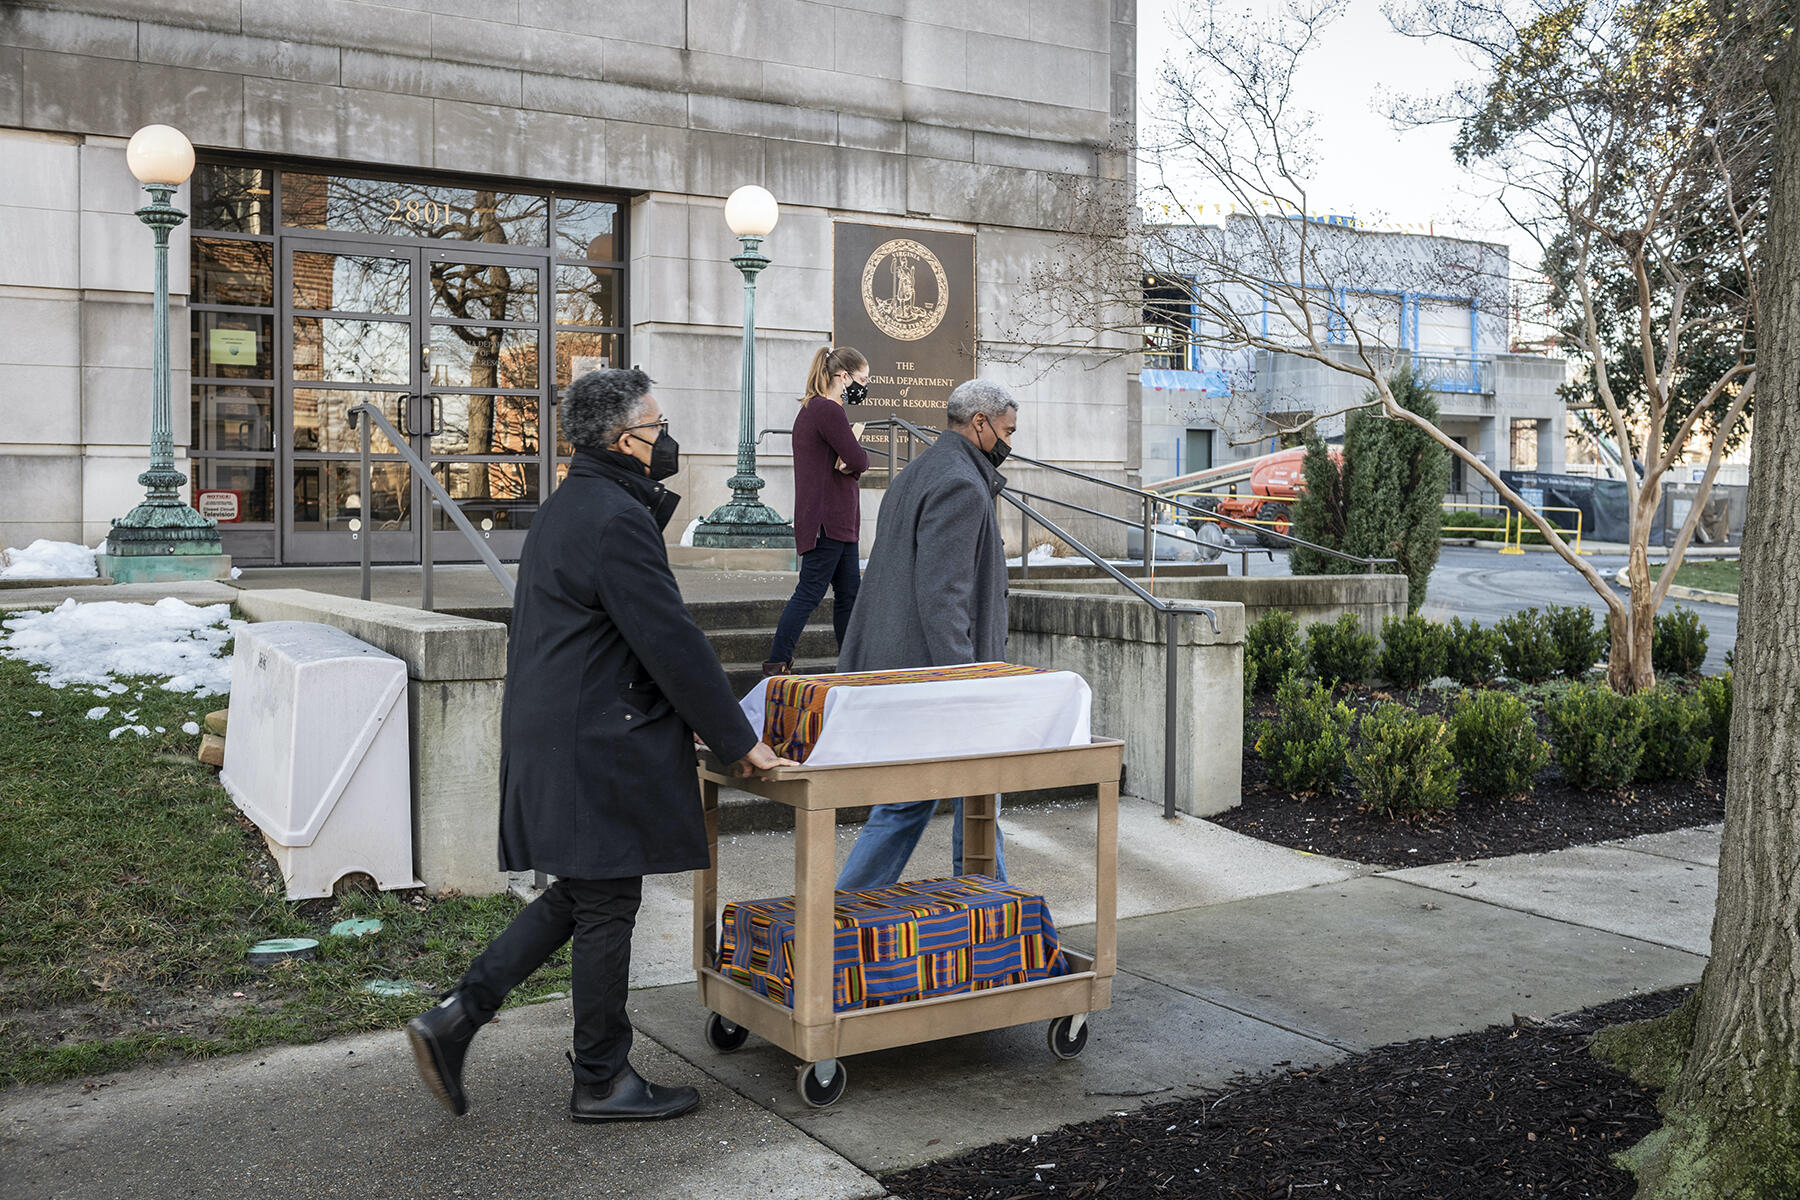 Members of the Family Representative Council transport the remains from the Virginia Department of Historic Resources on Jan. 6